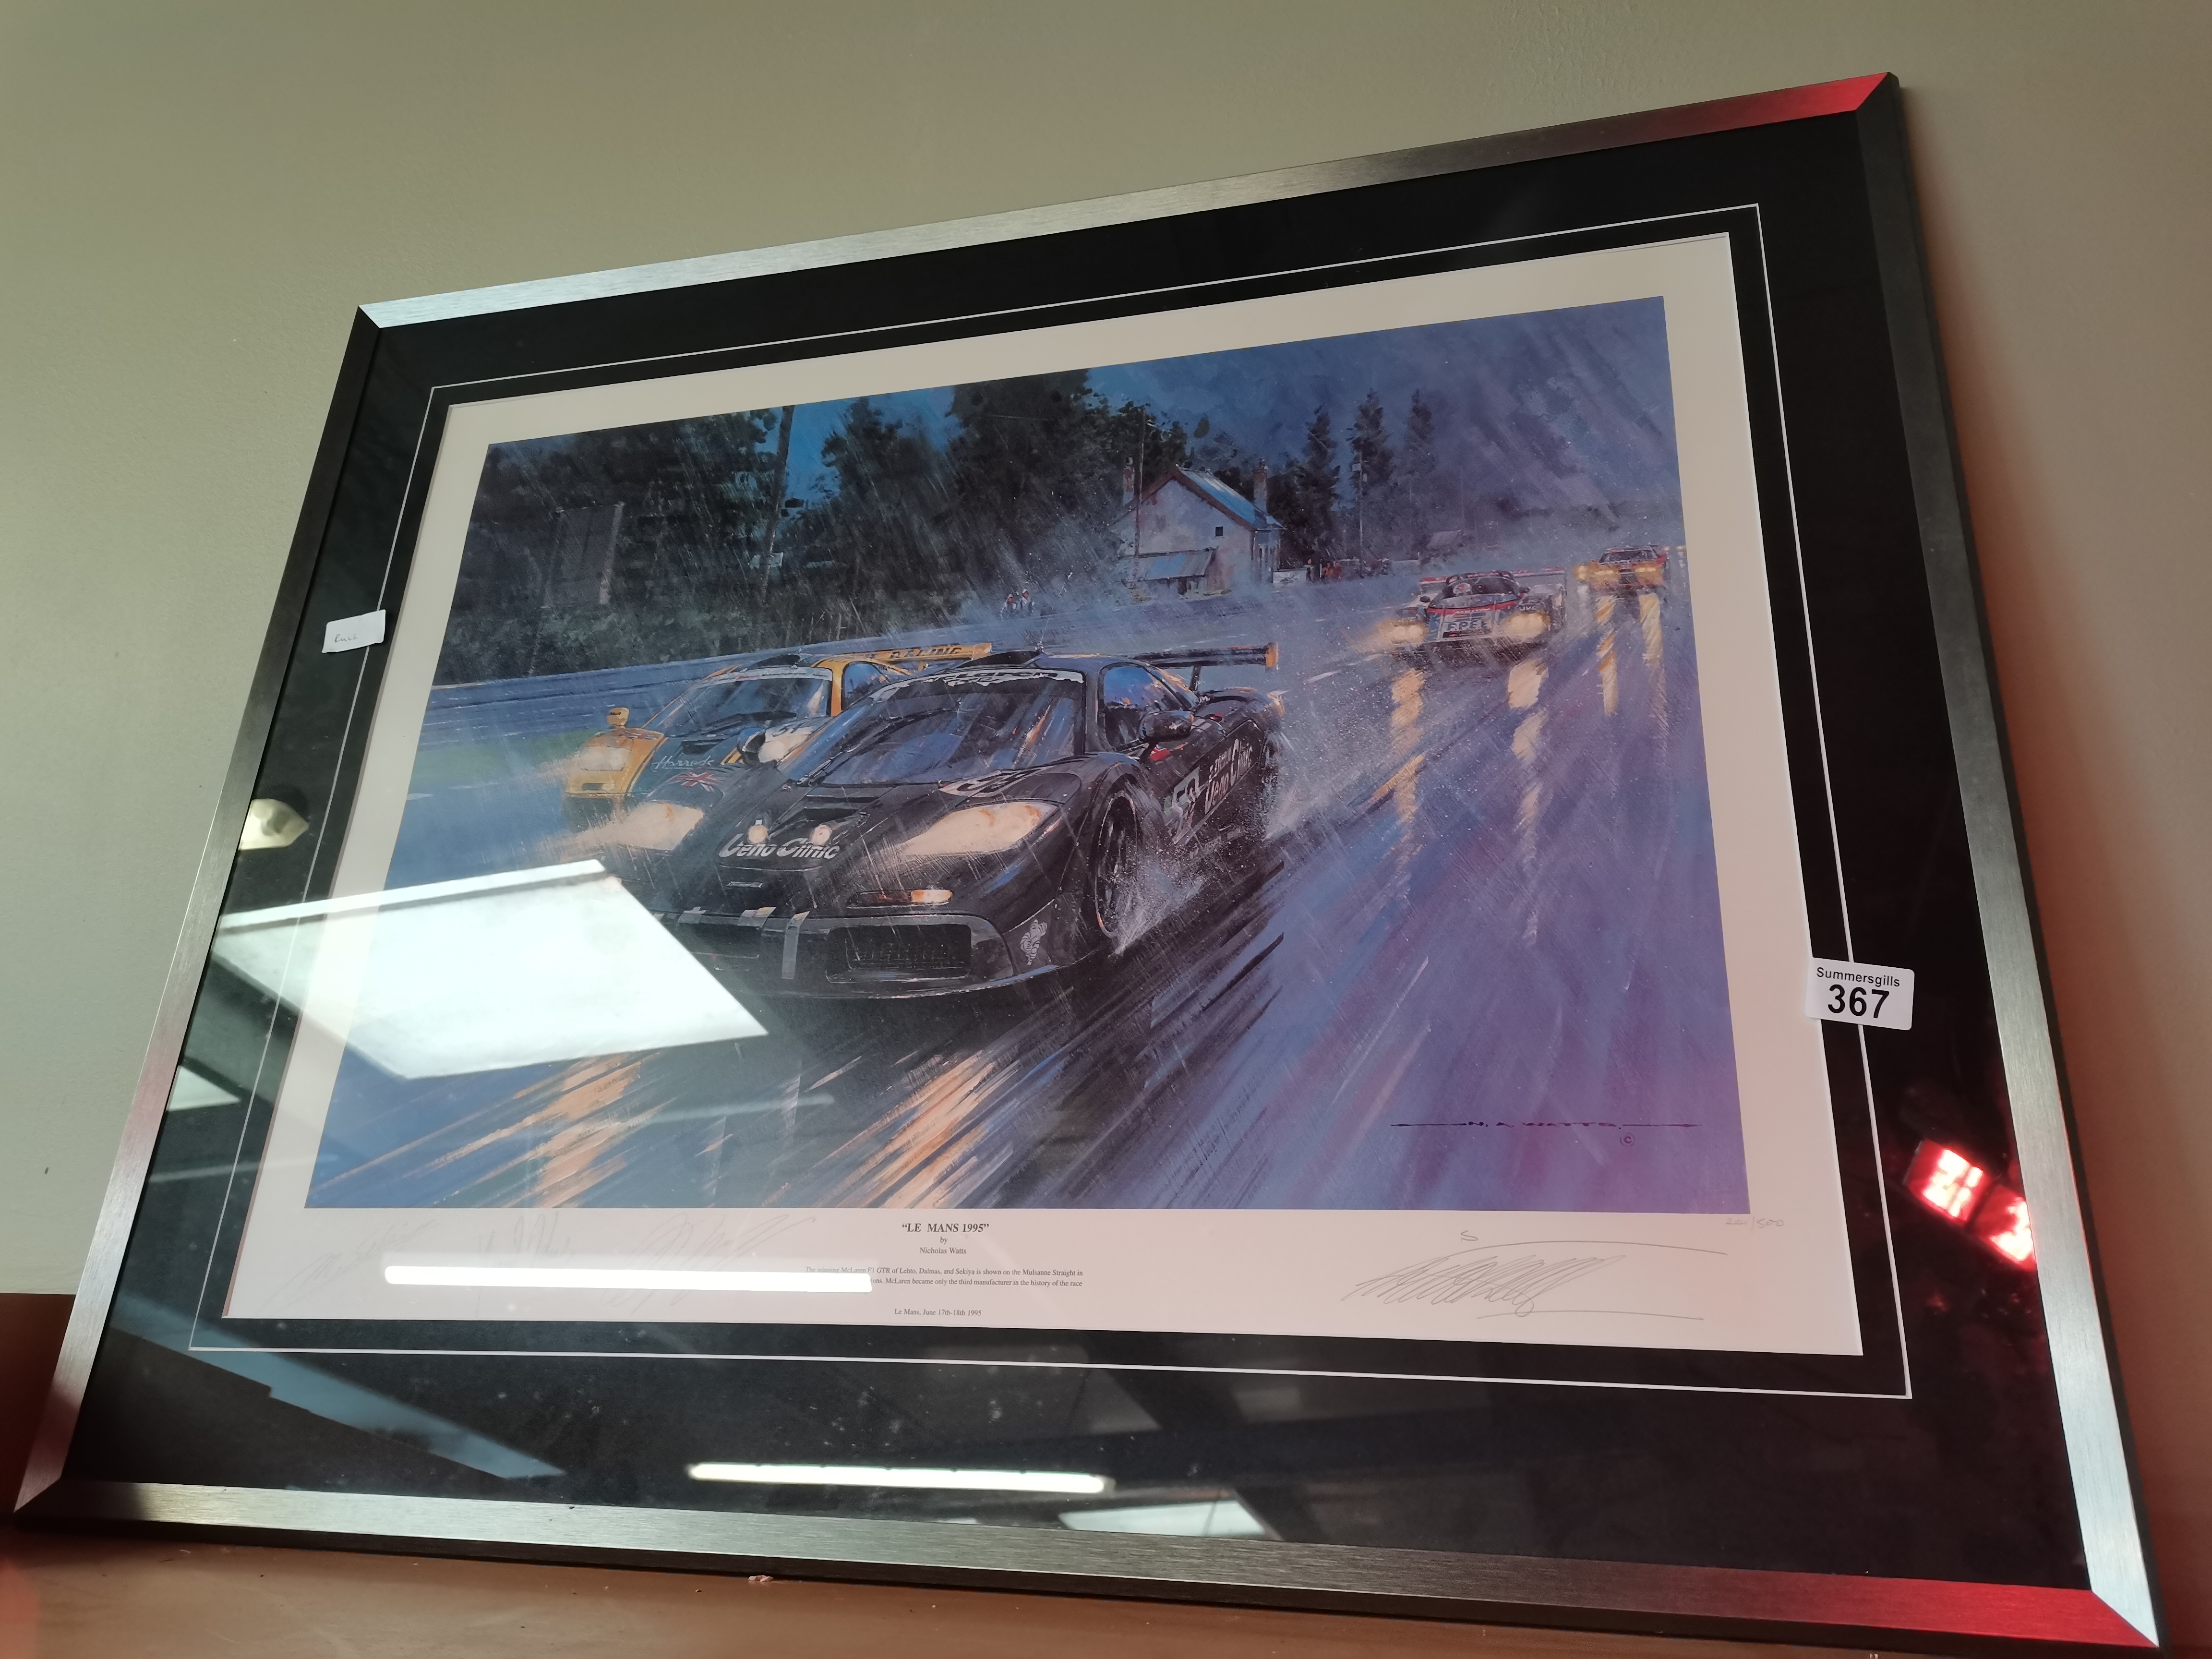 Ltd edt. Print of LE MANs by Nicholas Watts 241/500 Signed - Image 2 of 2